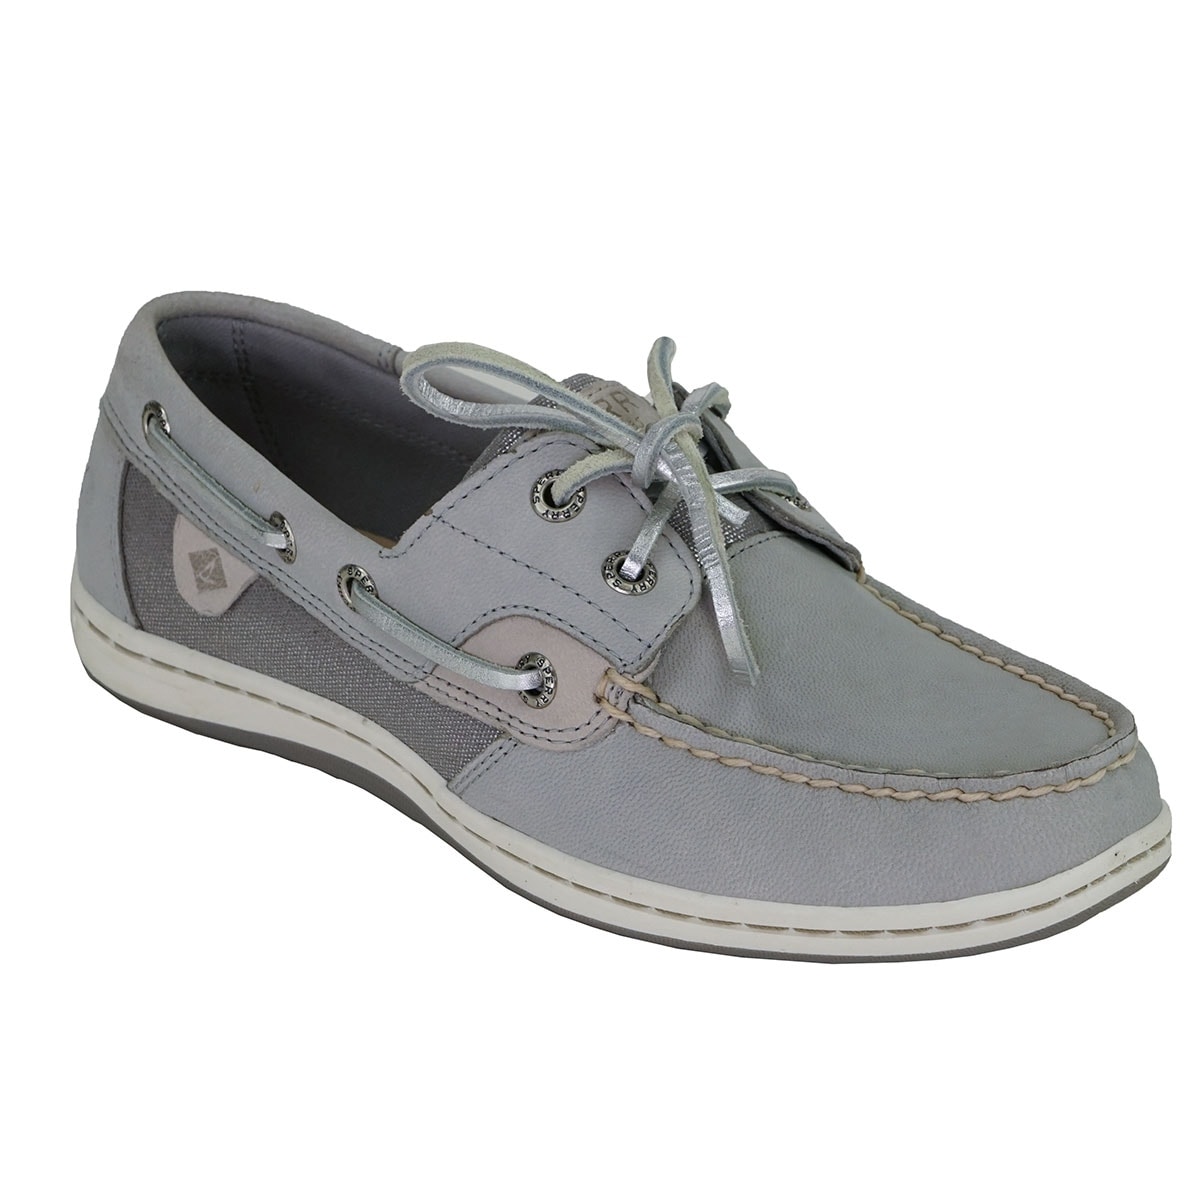 Koifish Sparkle Boat Shoes - Grey 